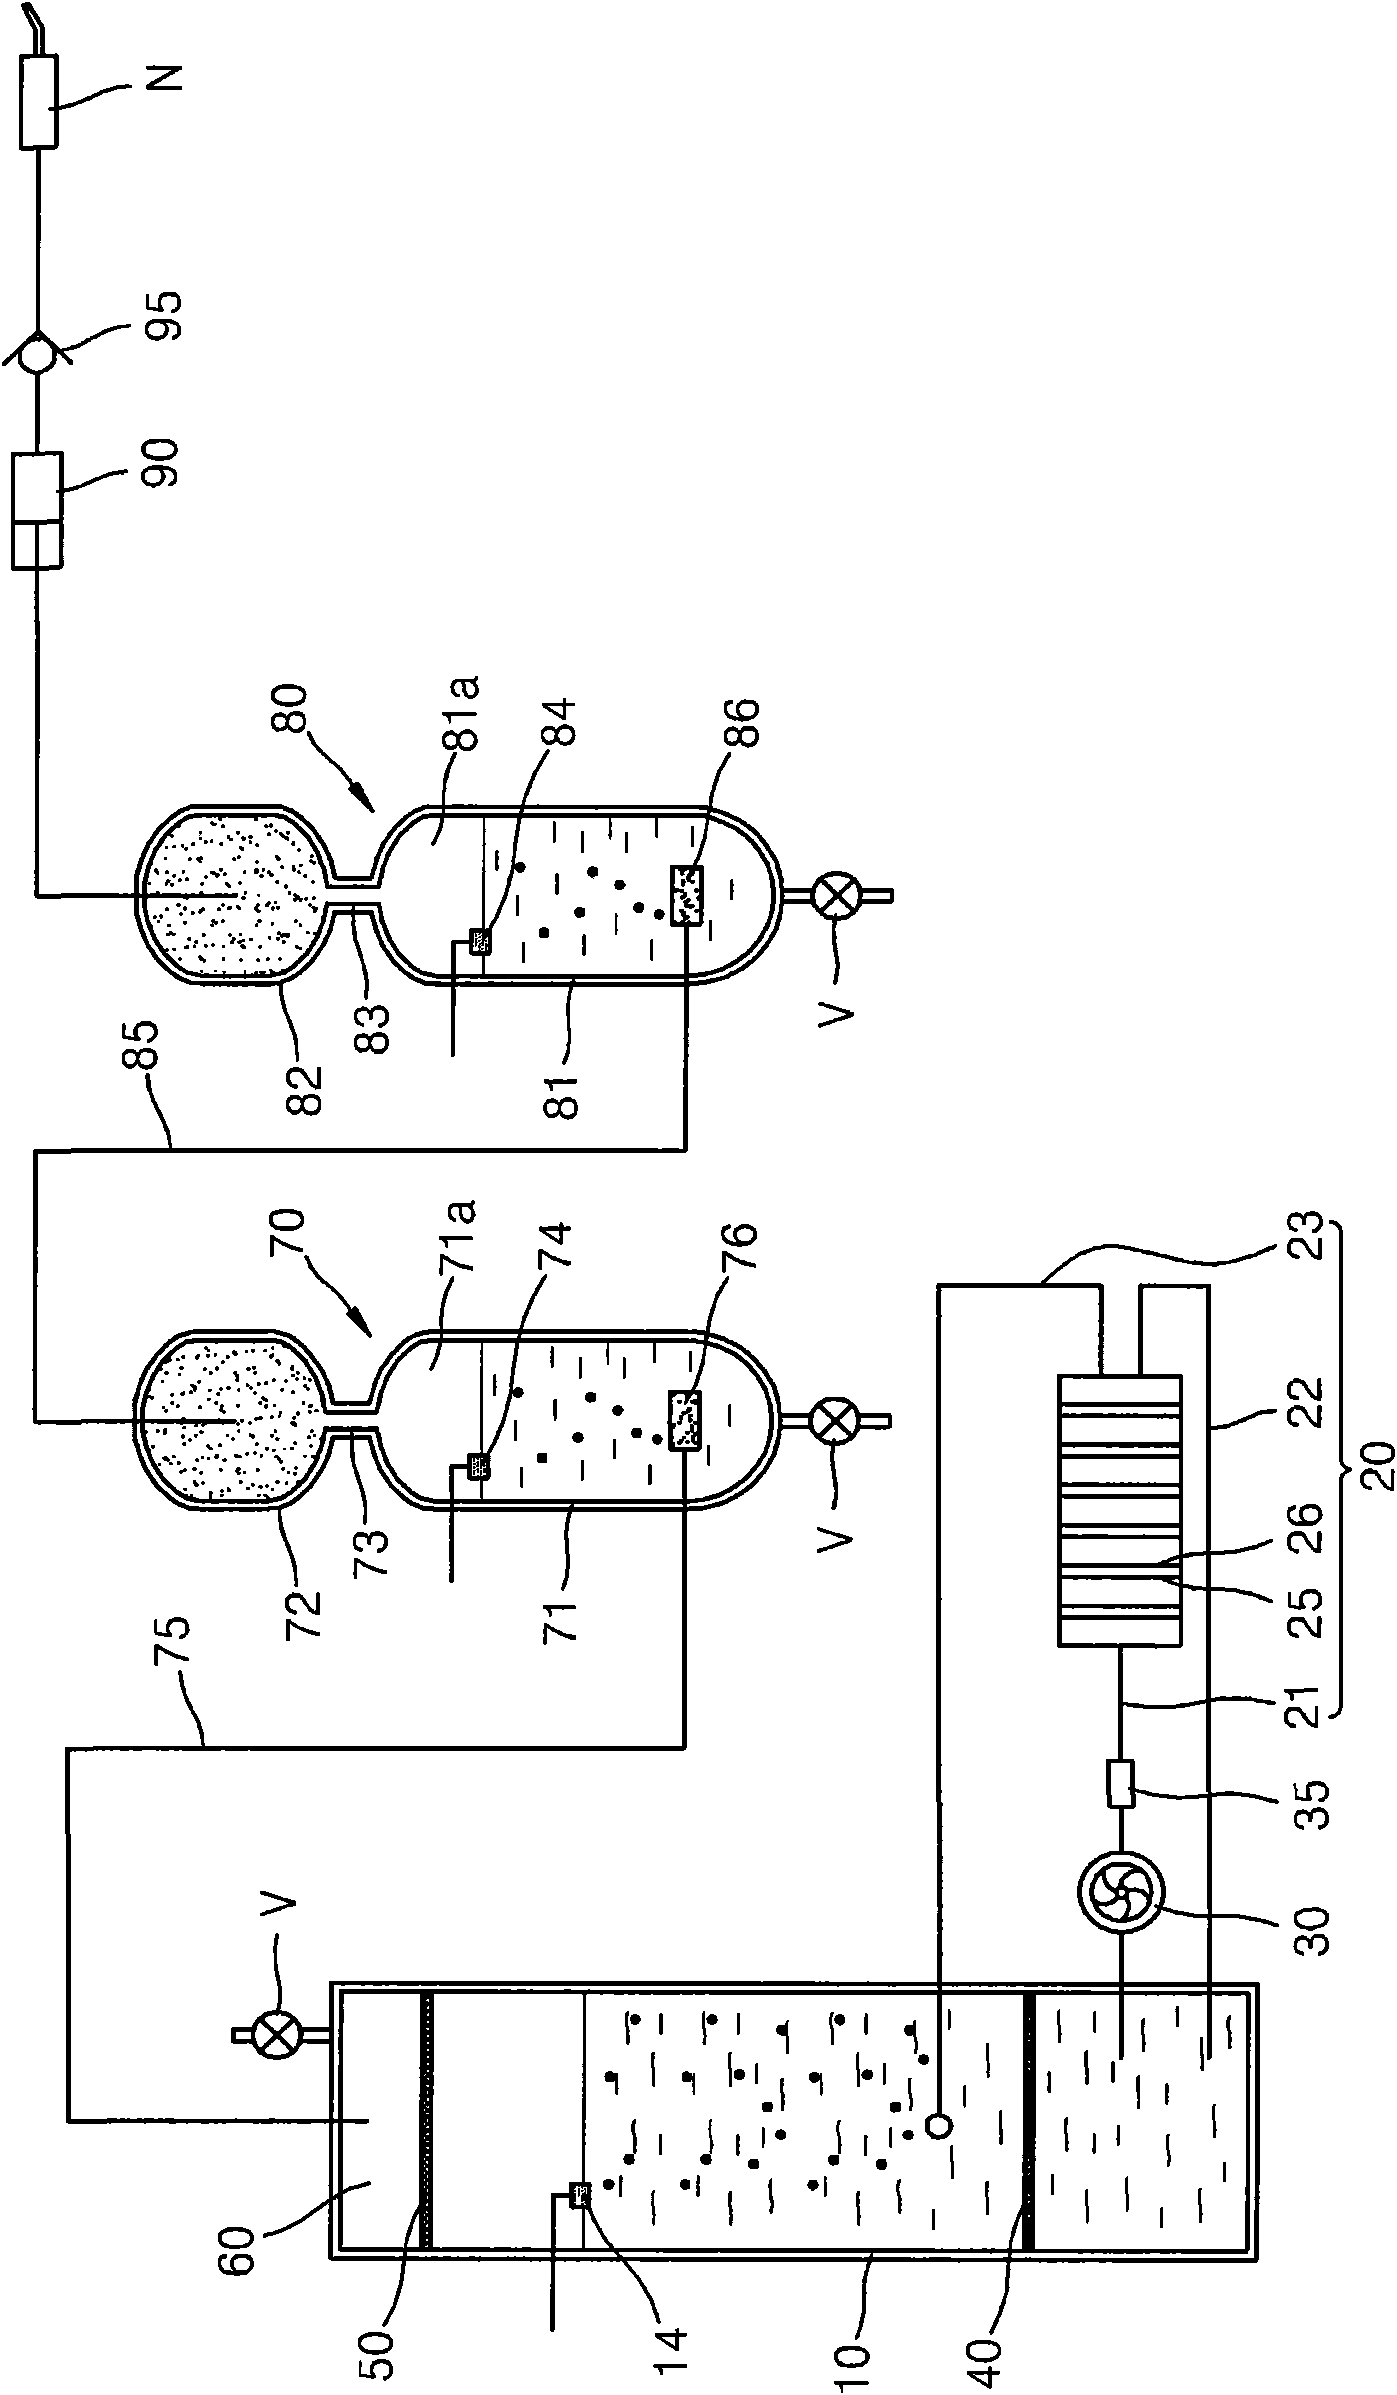 Apparatus for producing a mixture of hydrogen and oxygen